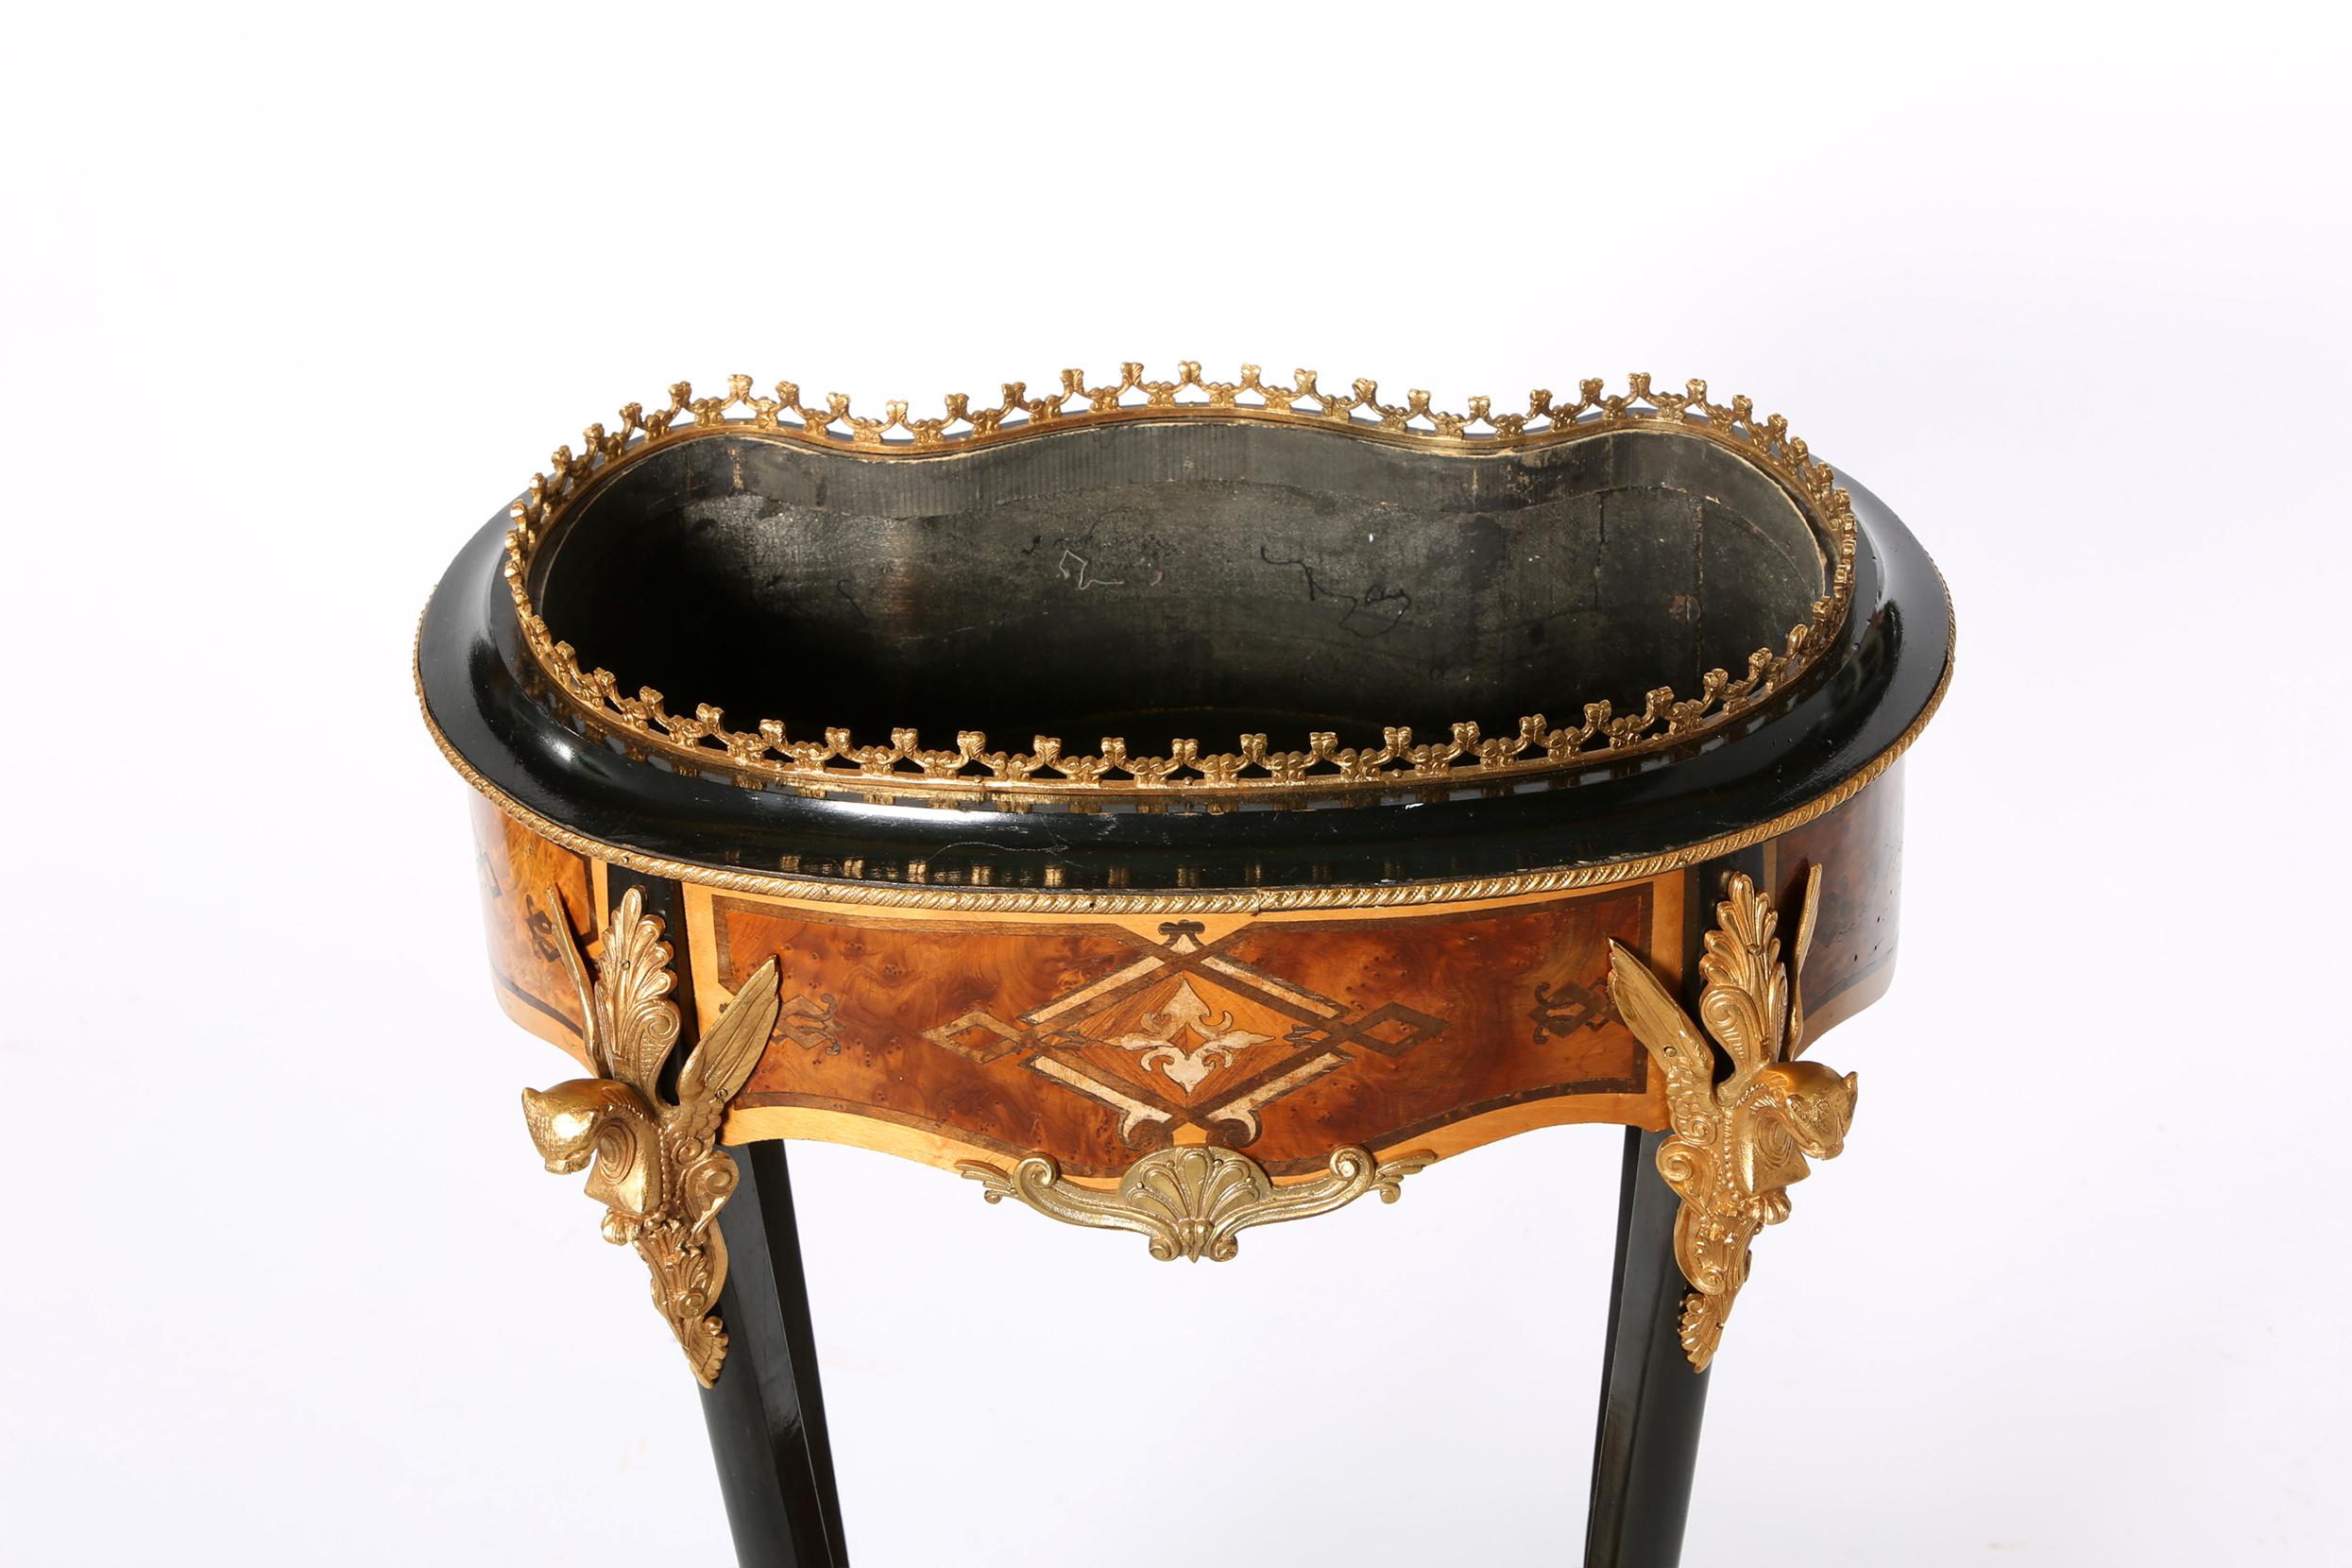 20th Century Ebonised and Inlaid Top Bronze Mounted Planter